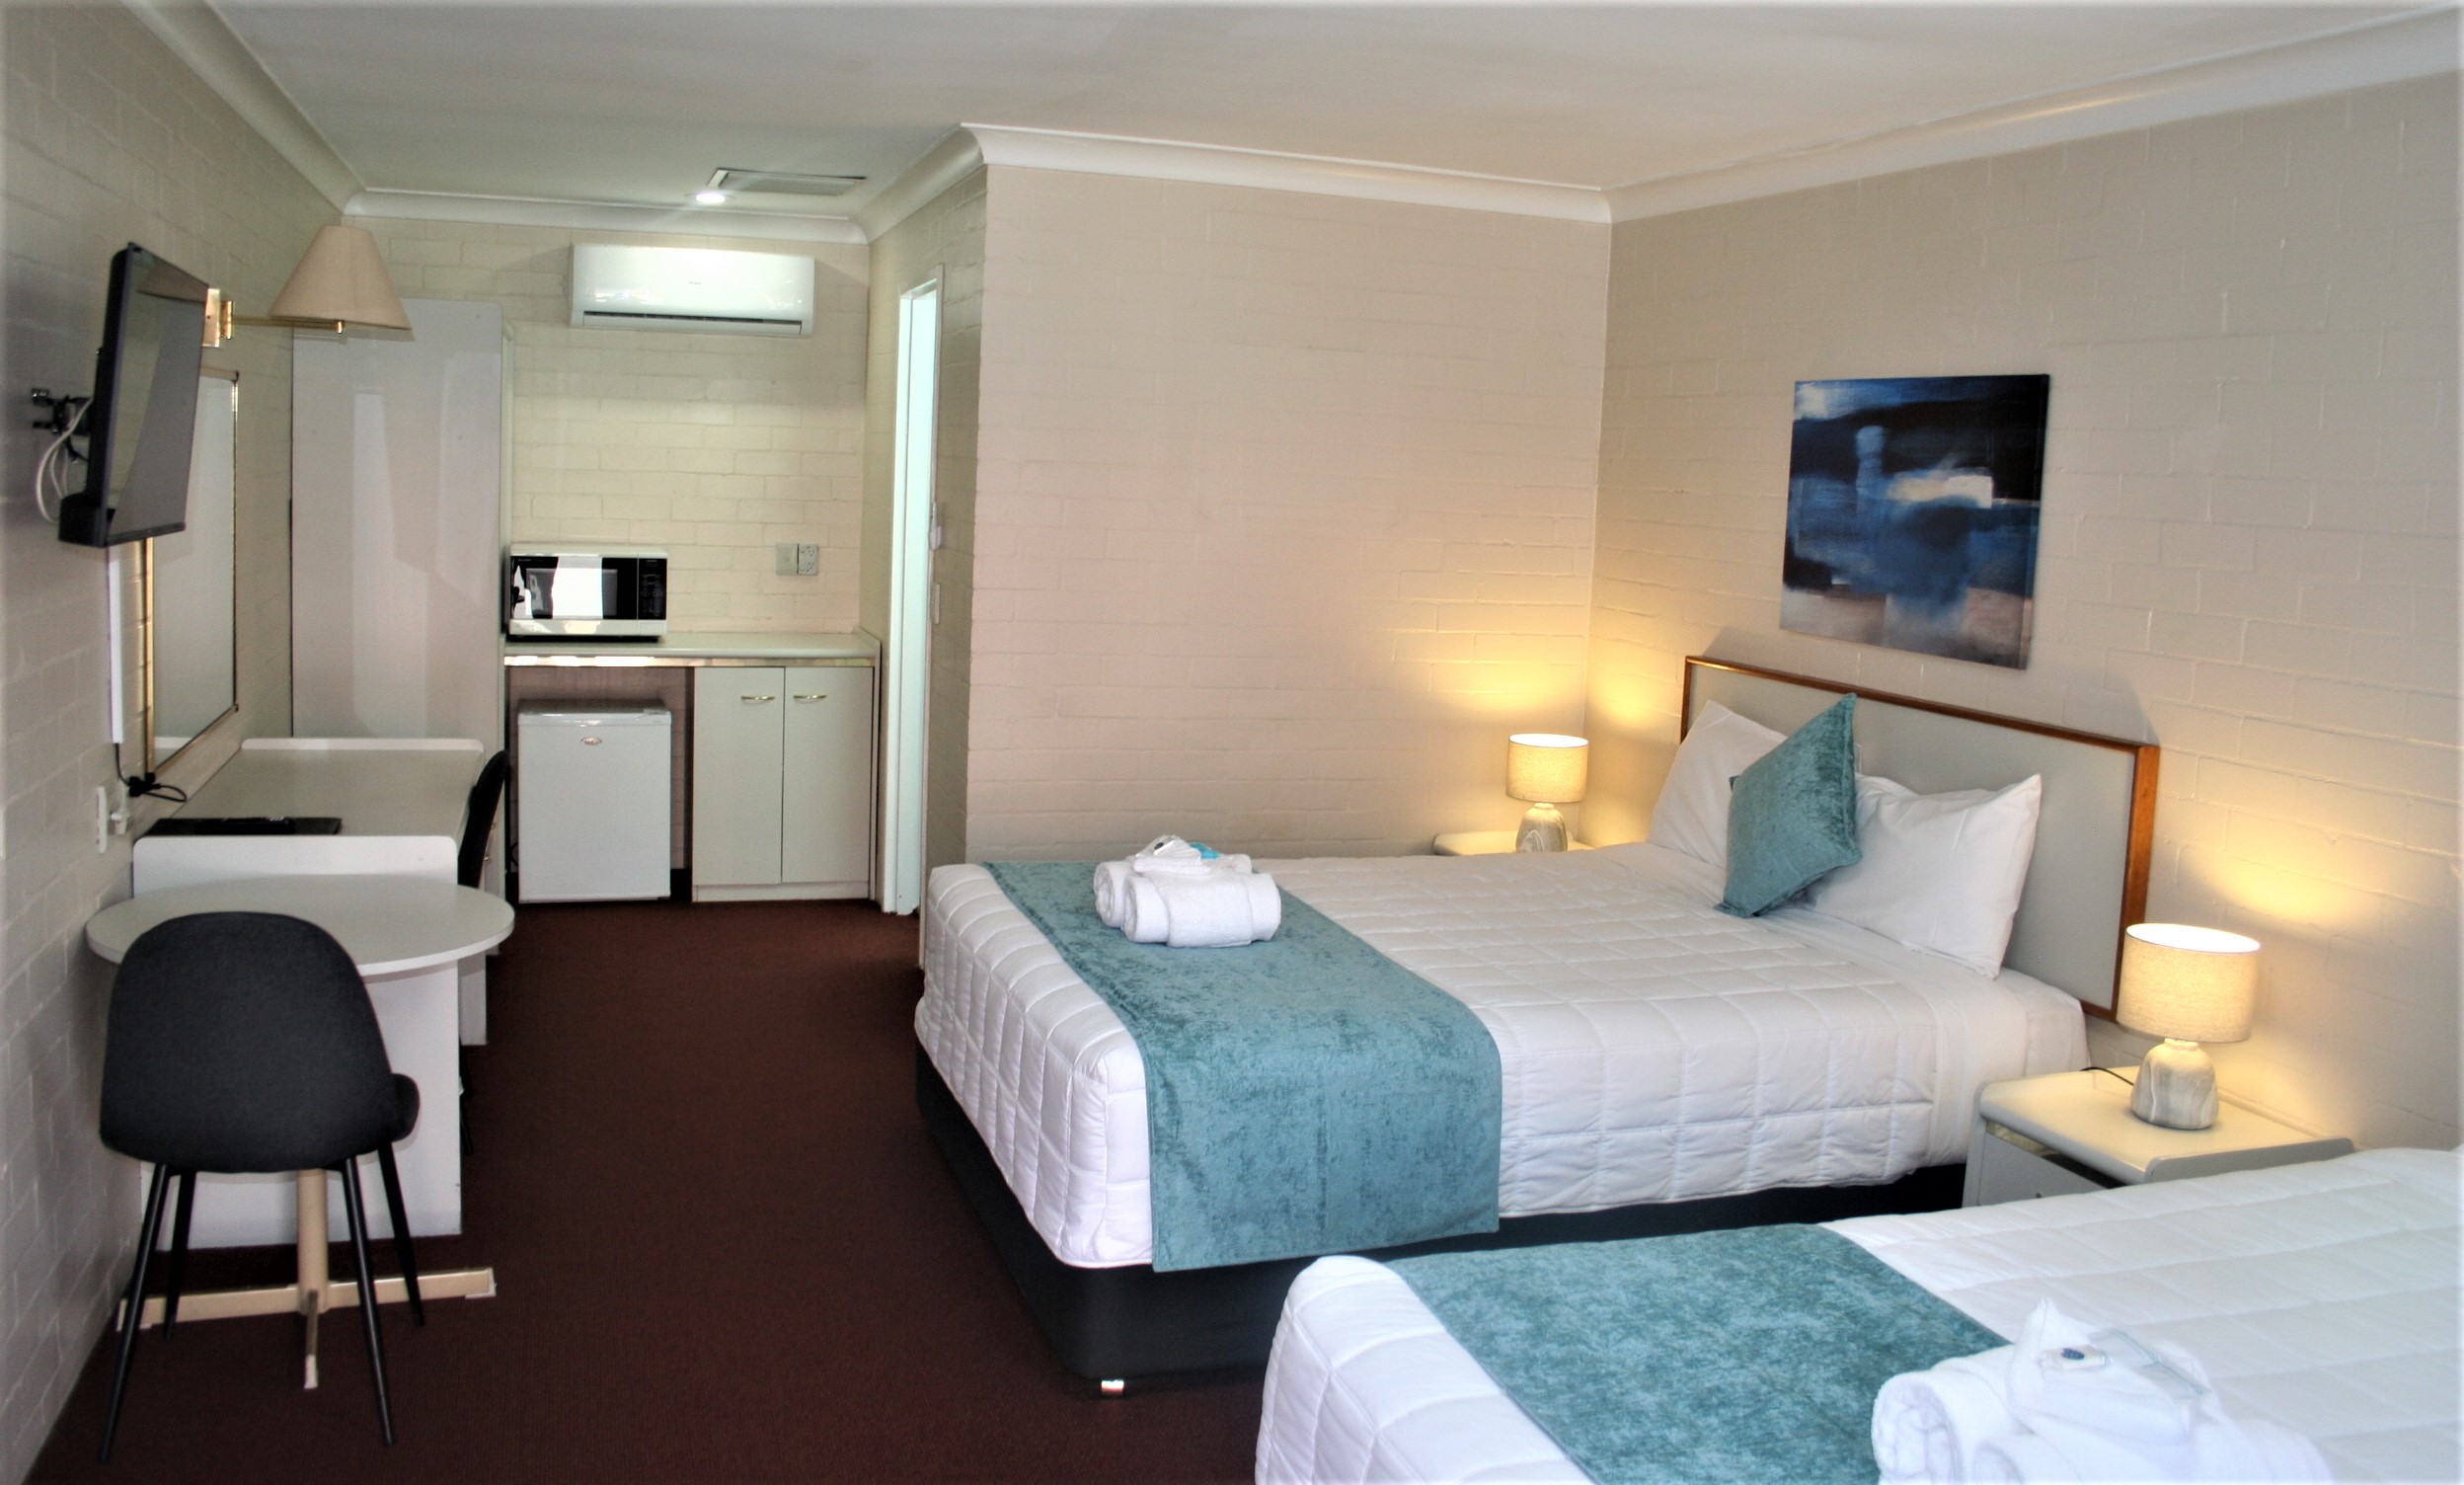 Accommodation - Rooms